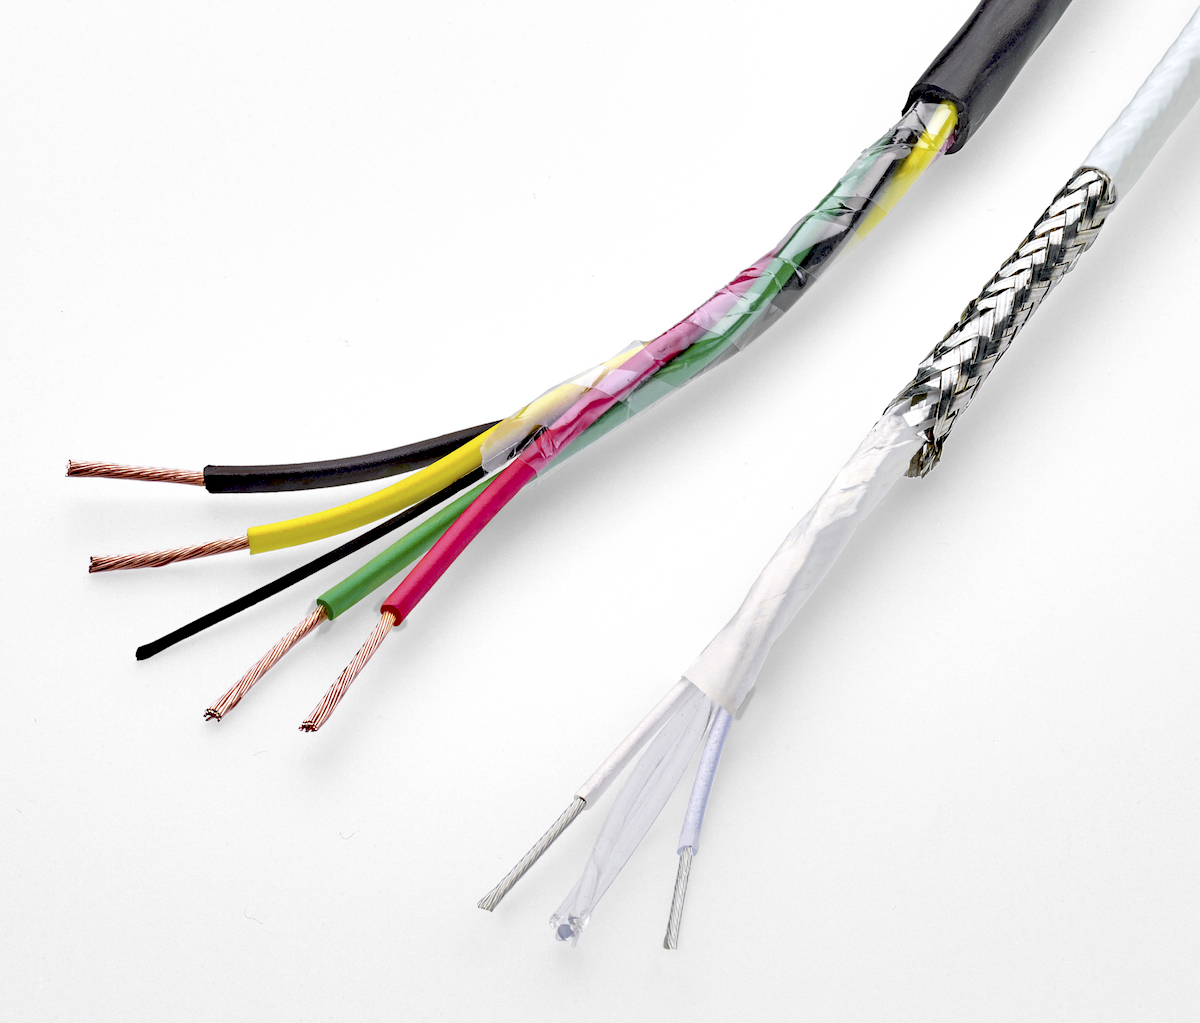 New Connector and Cable Products: April 2019 - TE Connectivity Raychem CANbus (controller area network) cables